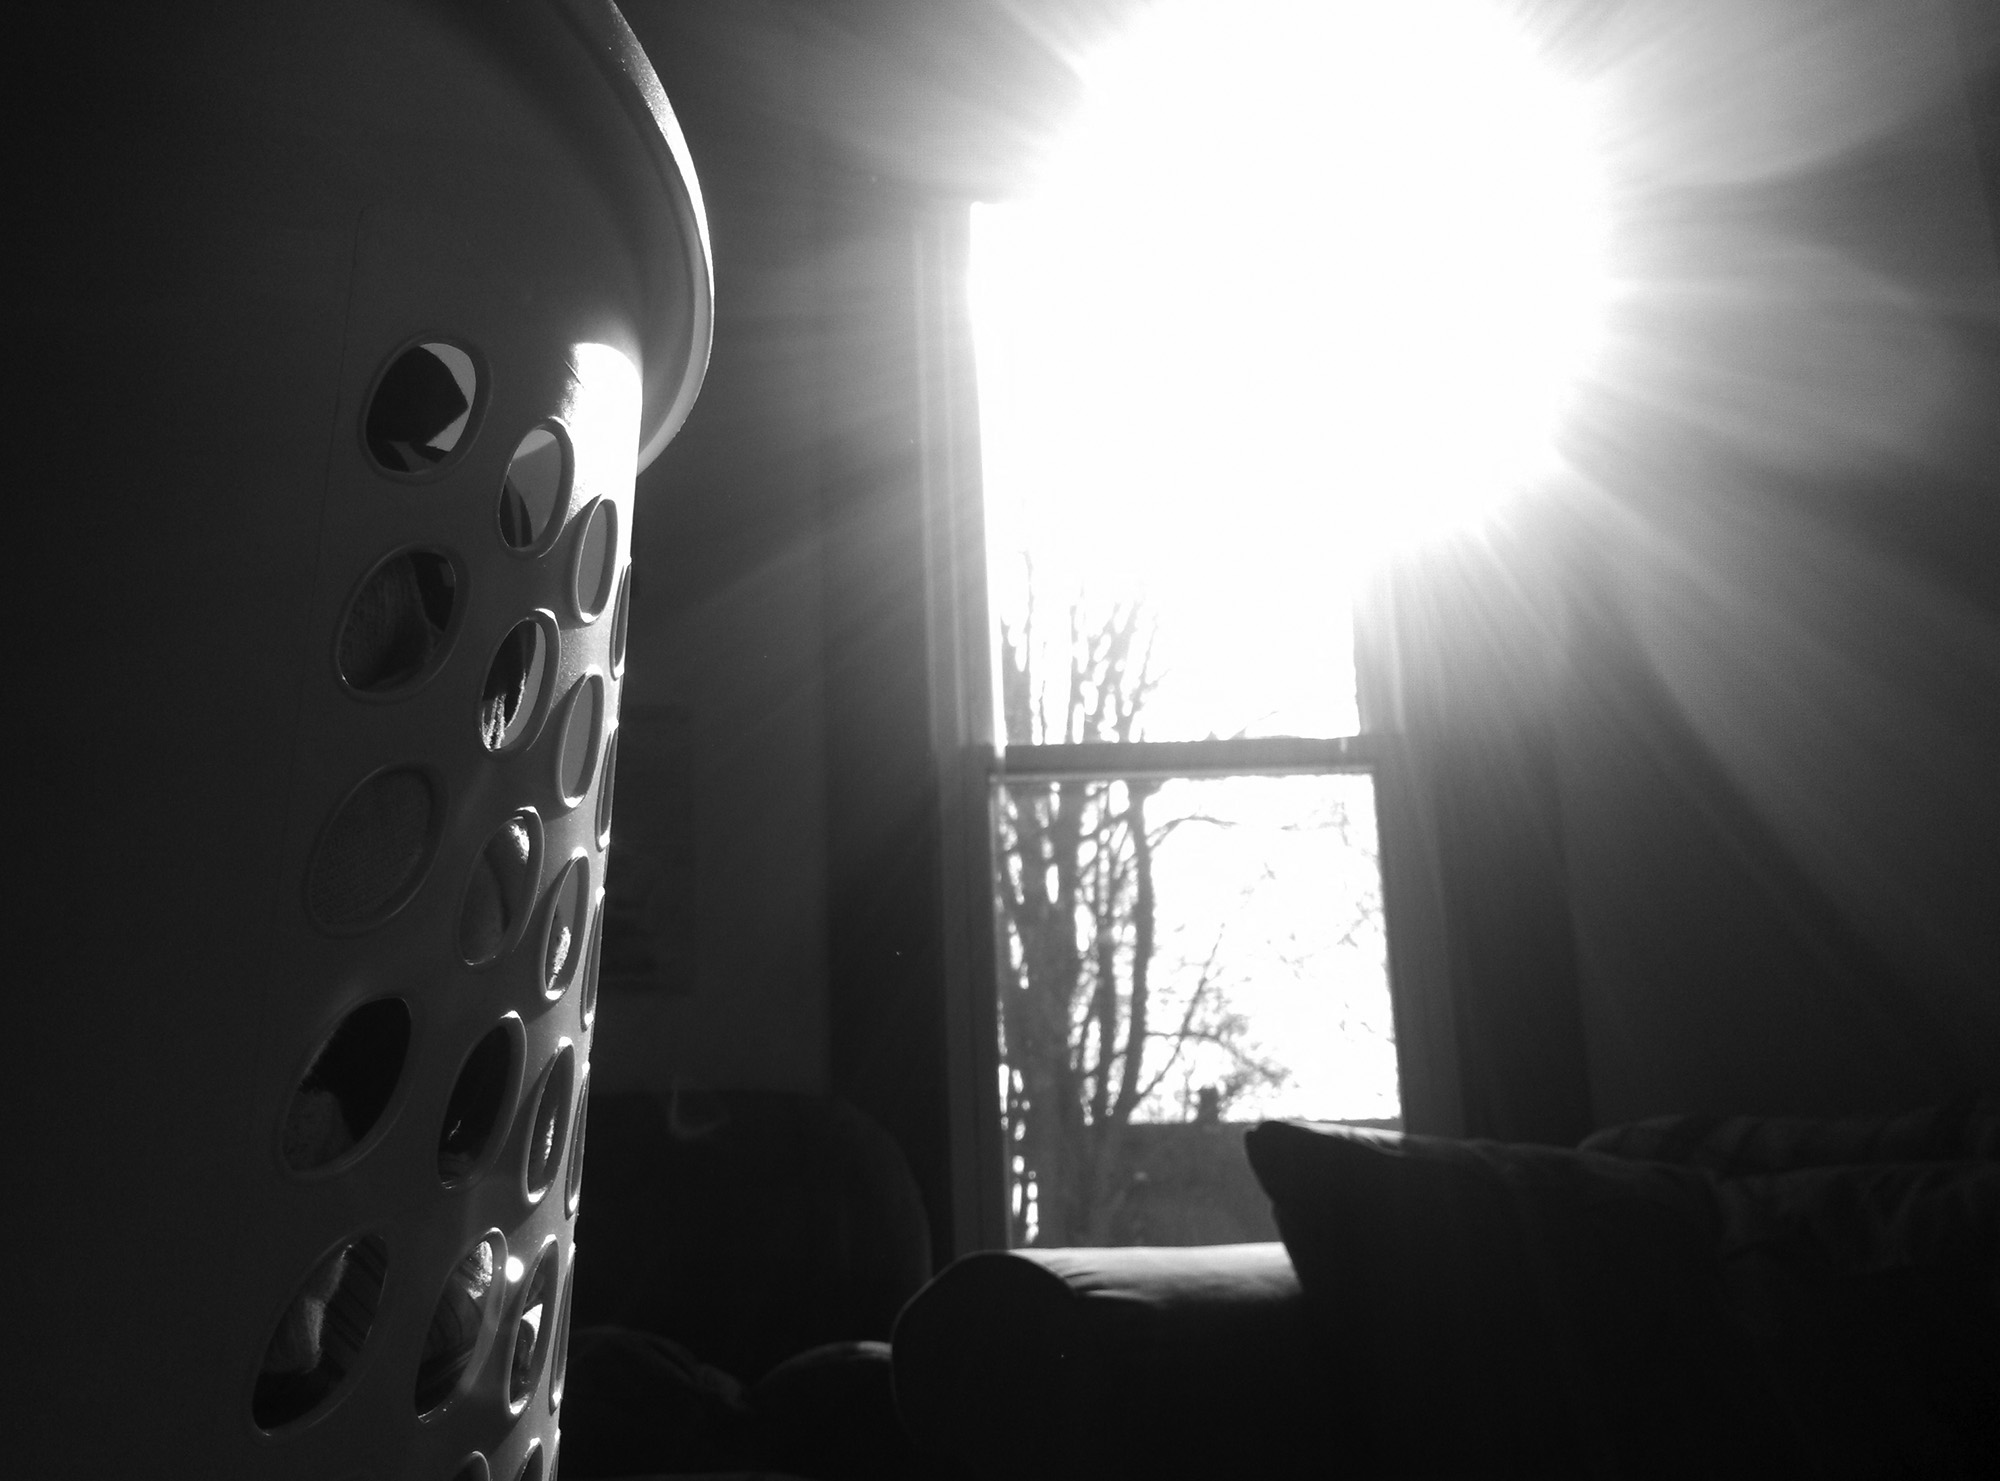 Foreboding image of the silhouette of a laundry basket